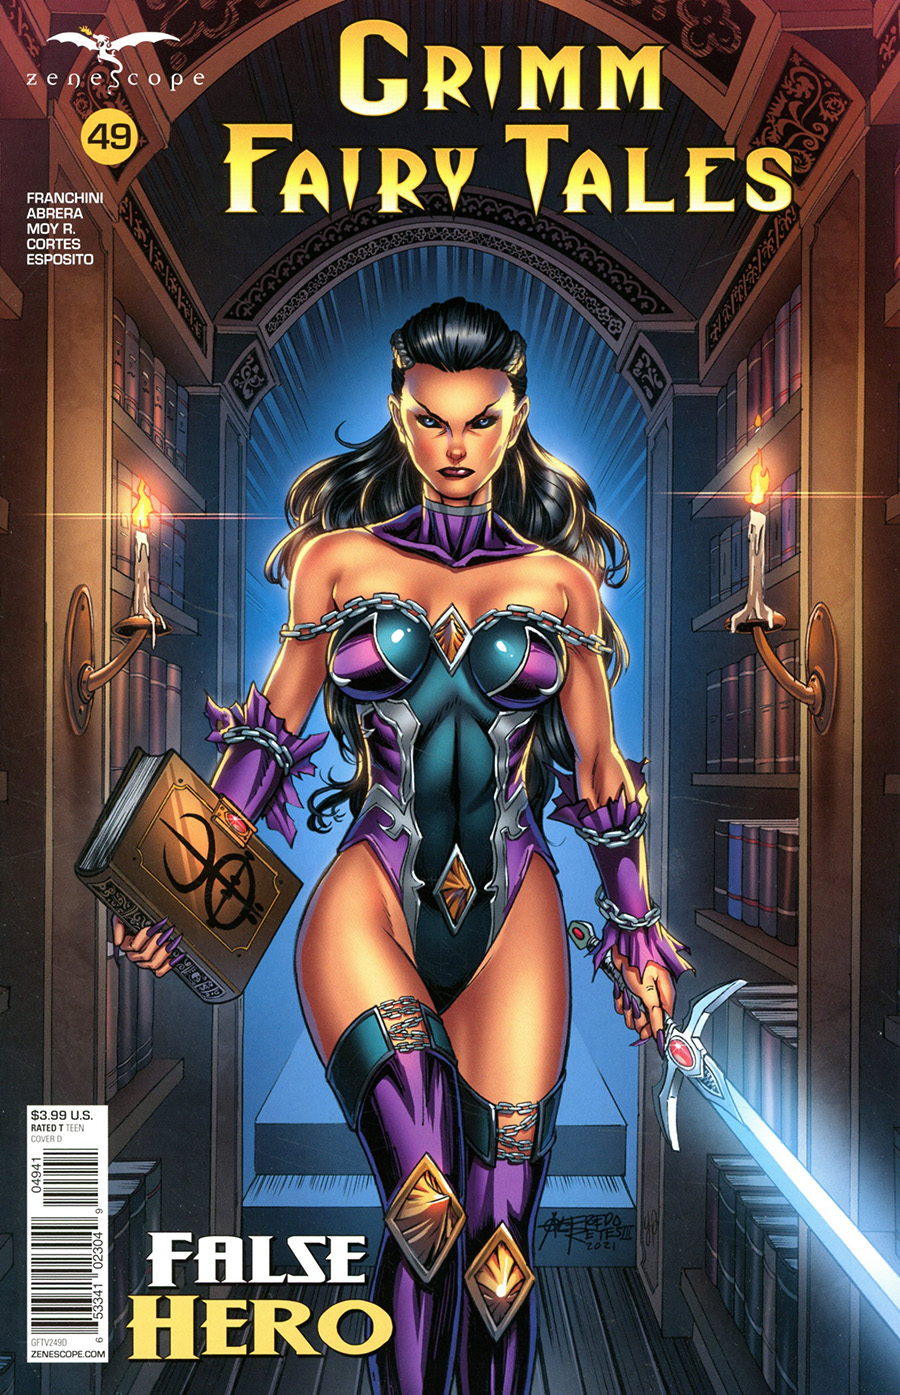 Grimm Fairy Tales Vol 2 #49 Cover D Alfredo Reyes